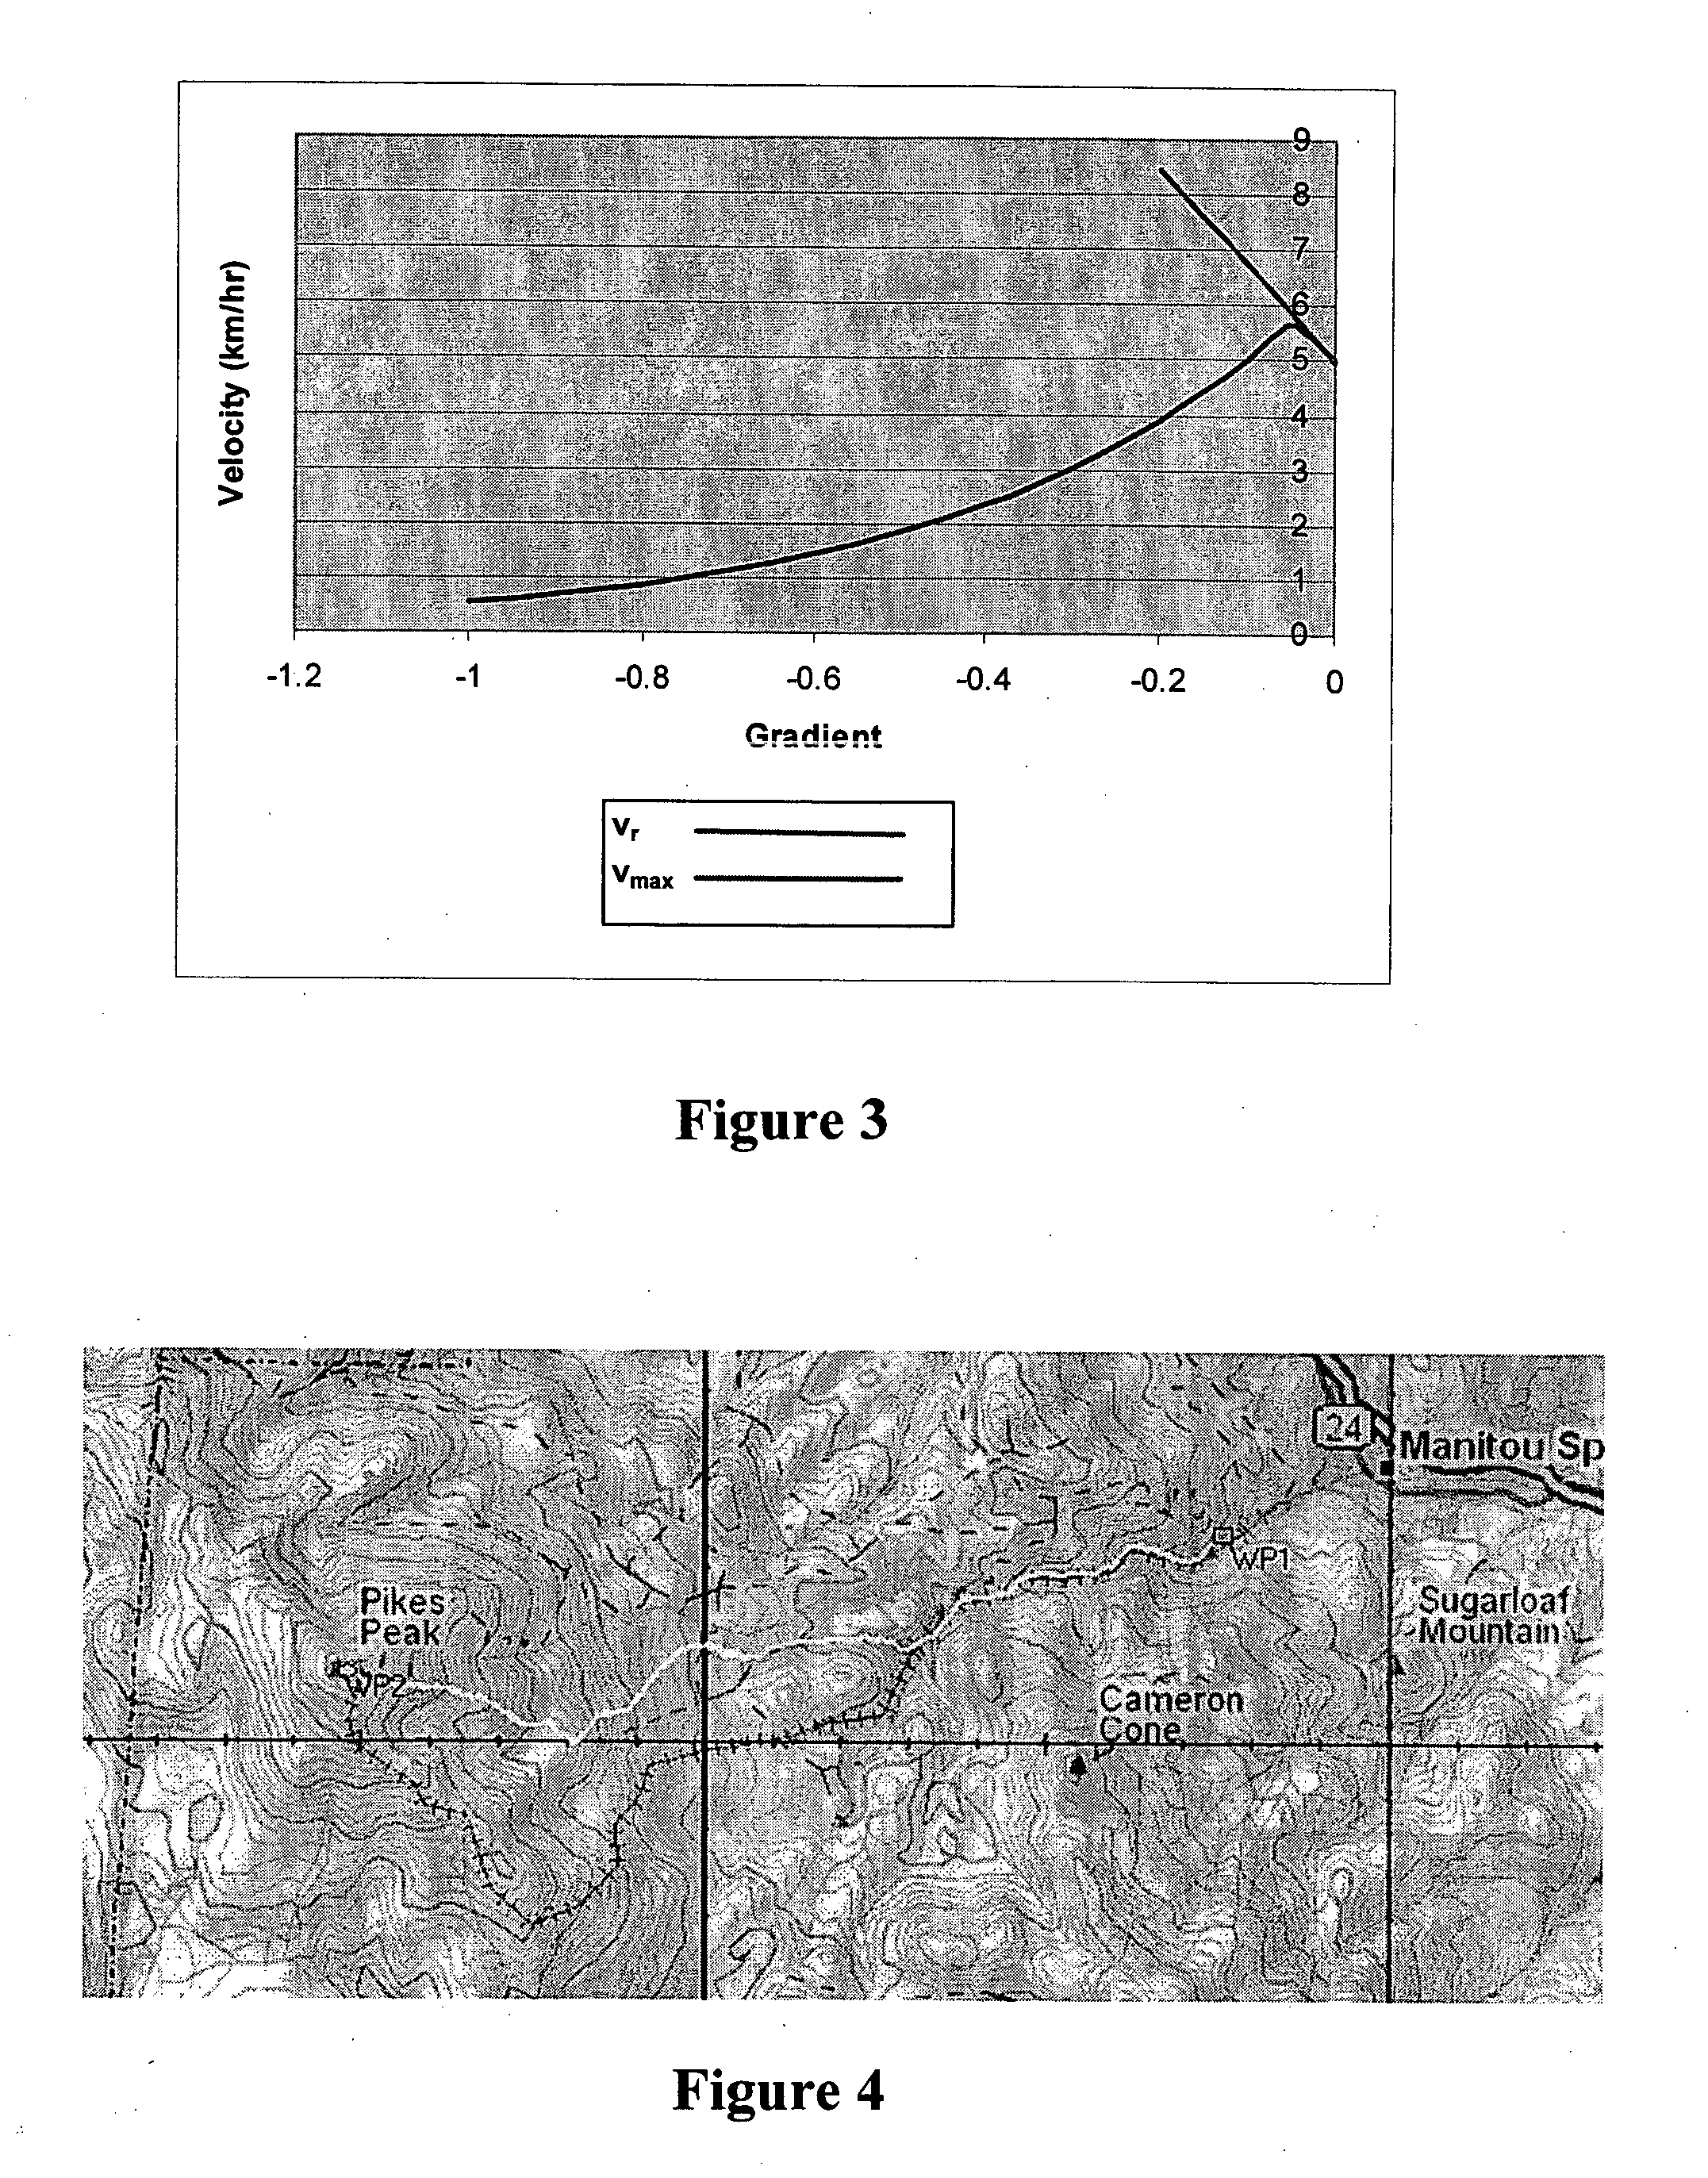 Device and method for energy-minimizing human ground routing